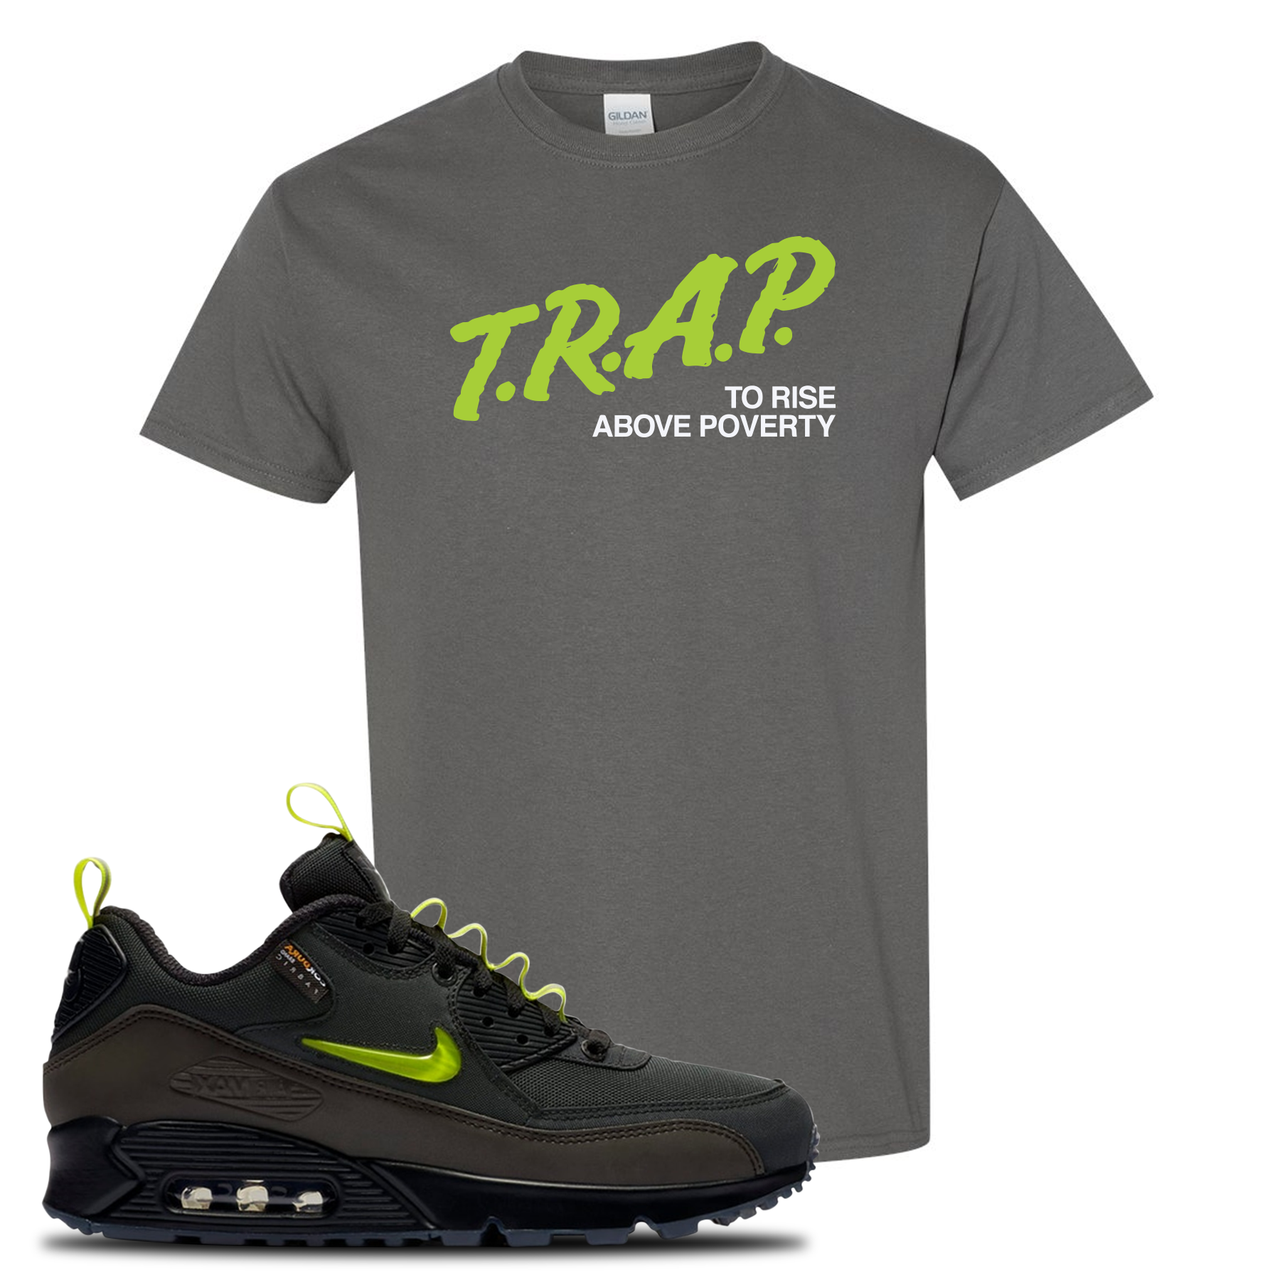 The Basement X Air Max 90 Manchester Trap to Rise Above Poverty Charcoal Gray Sneaker Hook Up T-Shirt